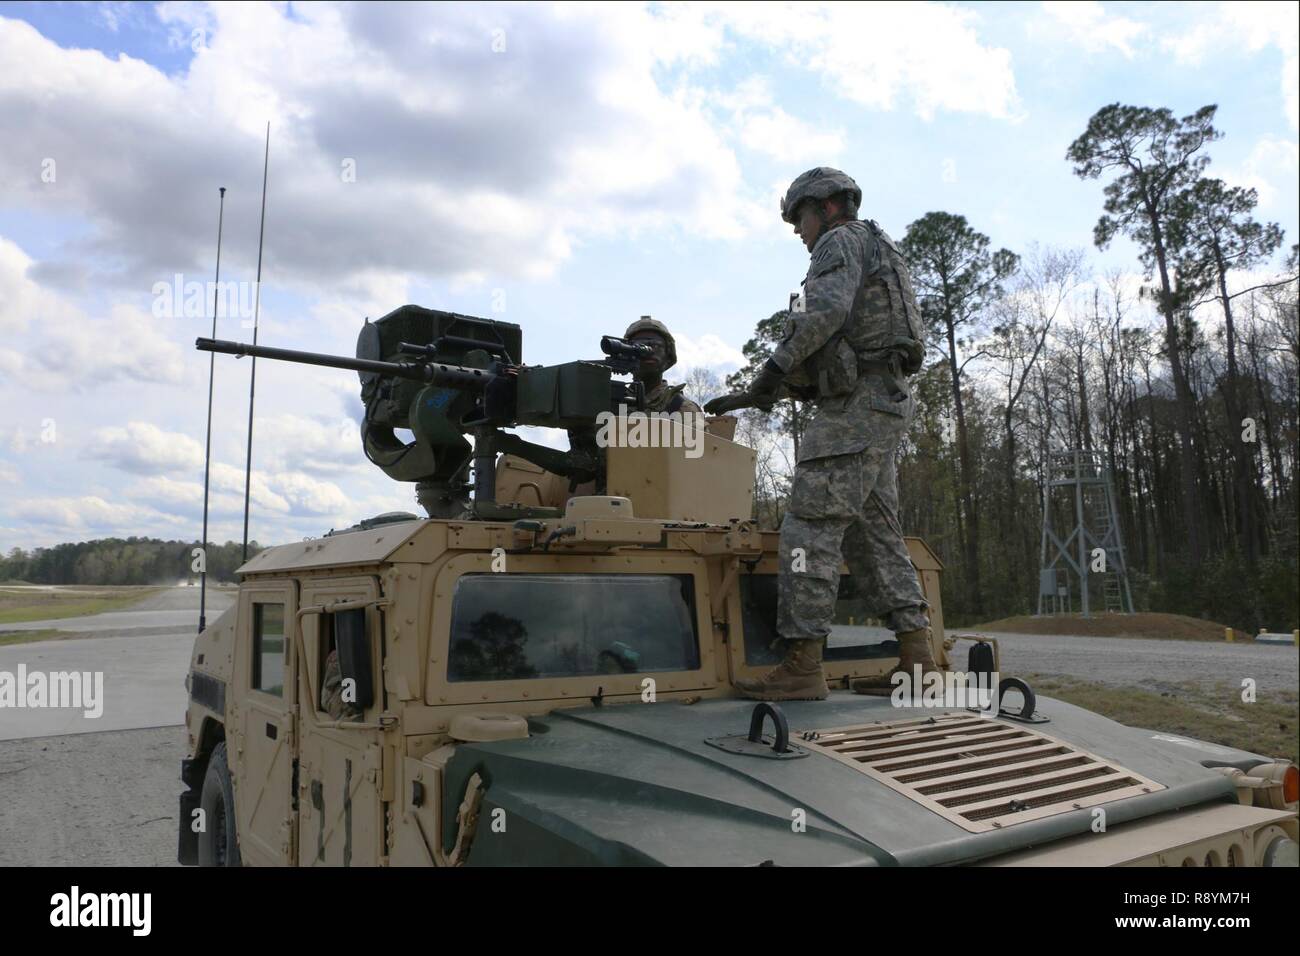 2nd Lt. Matthew Miller, assistant operations officer with 6th Squadron, 8th Cavalry Regiment, 2nd Infantry Brigade Combat Team, 3rd Infantry Division, clears an M2 .50 caliber machine gun during a mounted gunnery range March 8, 2017 at Fort Stewart, Ga. 6-8 Cav. Soldiers qualified with mounted weapons in preparation for a squadron field training exercise next month. Stock Photo